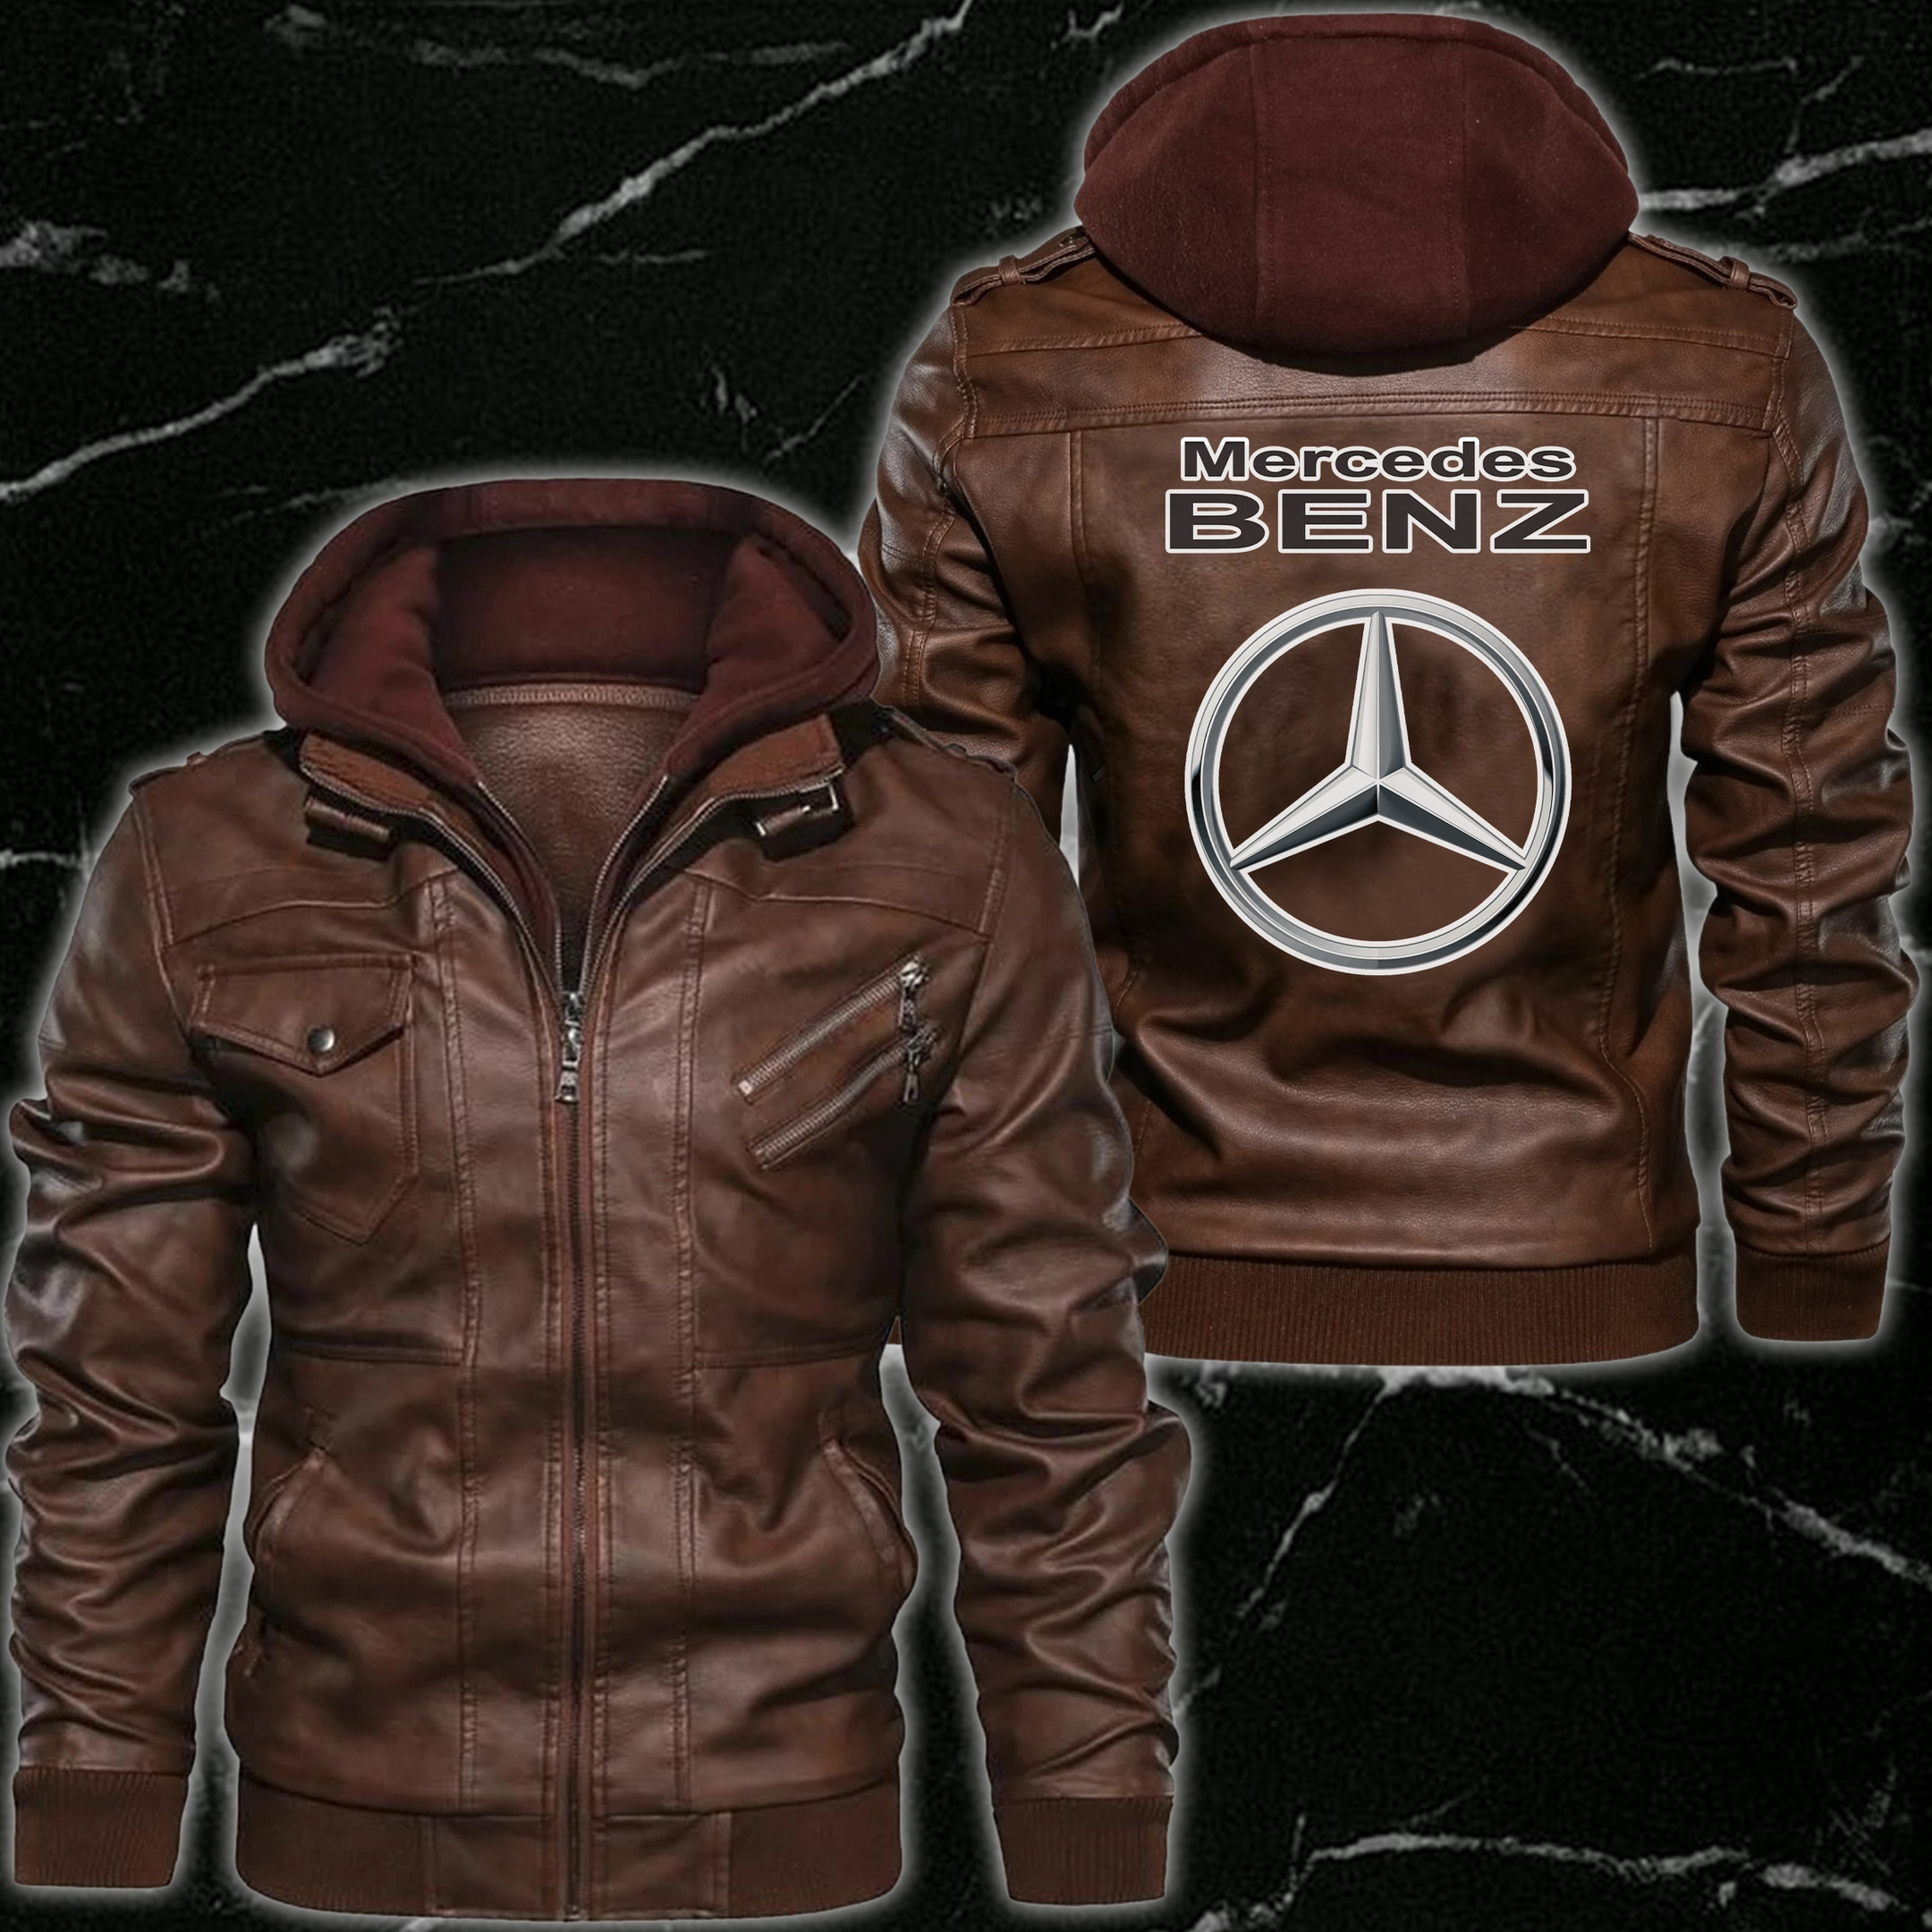 NEW Mercedes Benz Automobile Car Motorcycle Rider Leather Jackets2